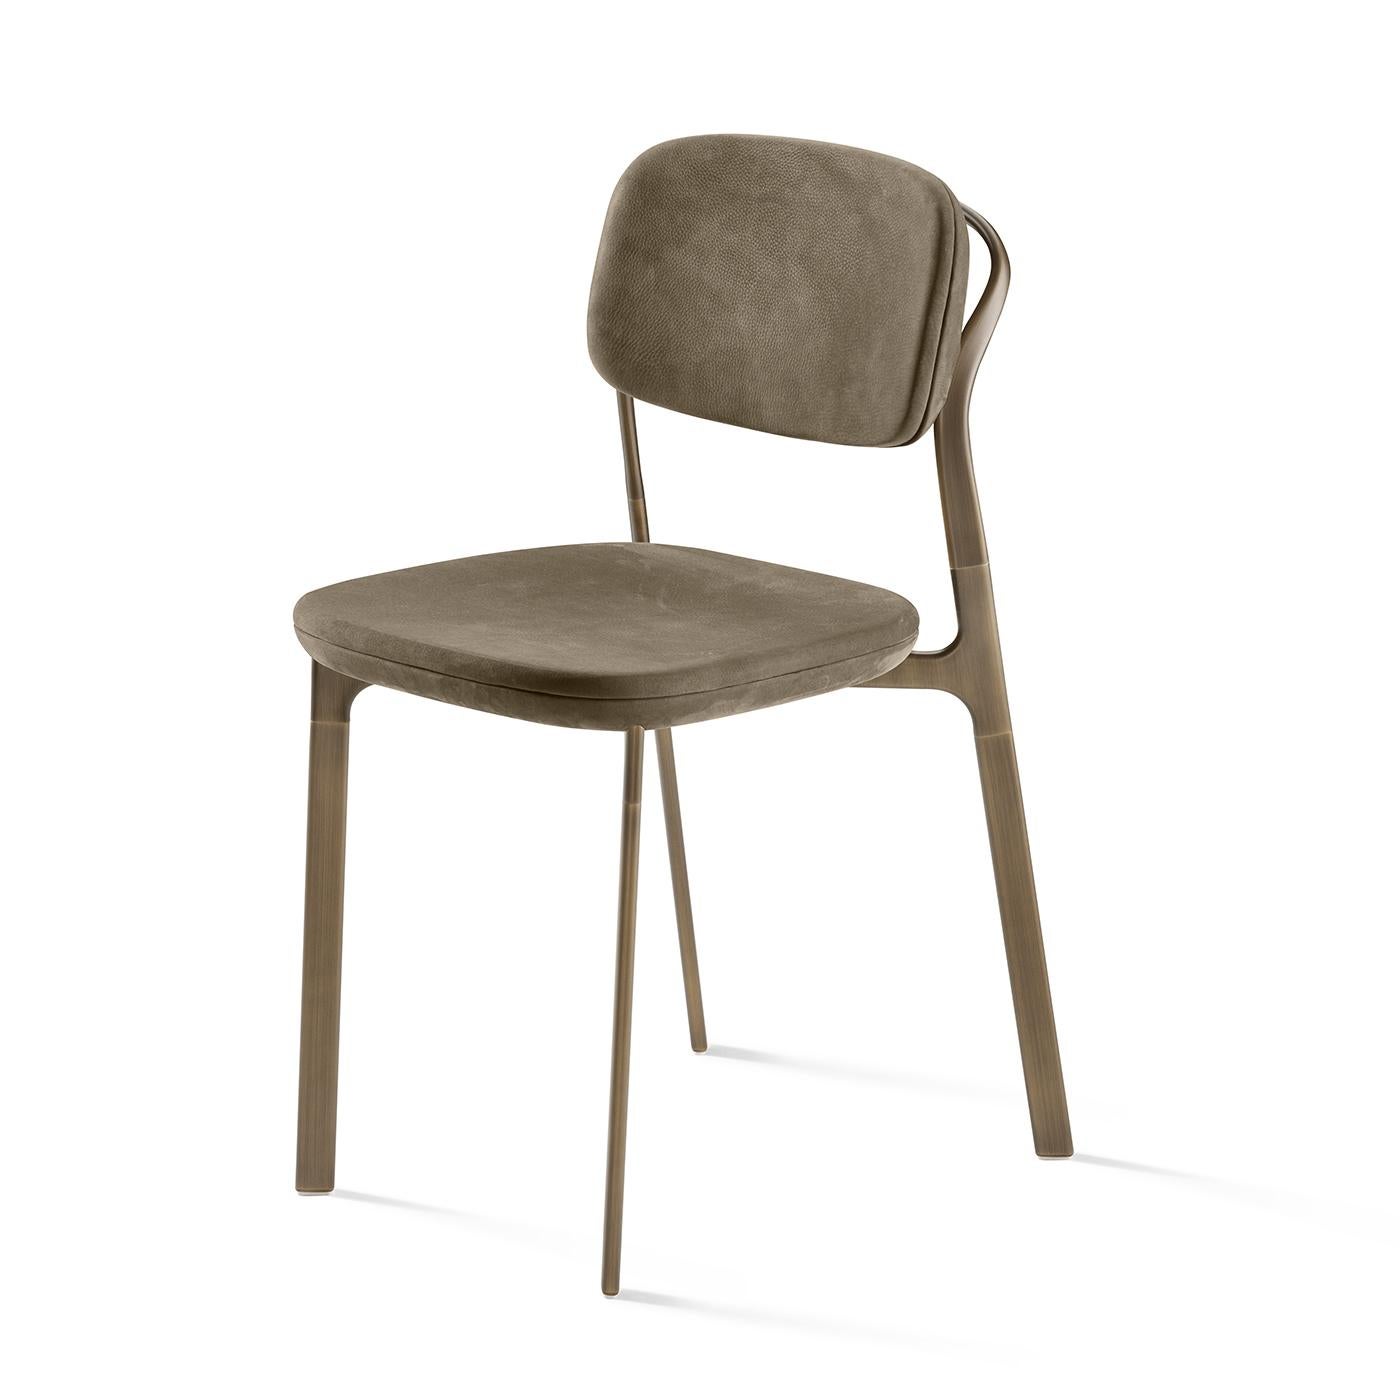 Inspired by clean and classic lines, this chair flaunts an elegant modern design that will effortlessly enrich any dining room when displayed around the table with others from the same series. Resting on a brass structure, it features a soft seat